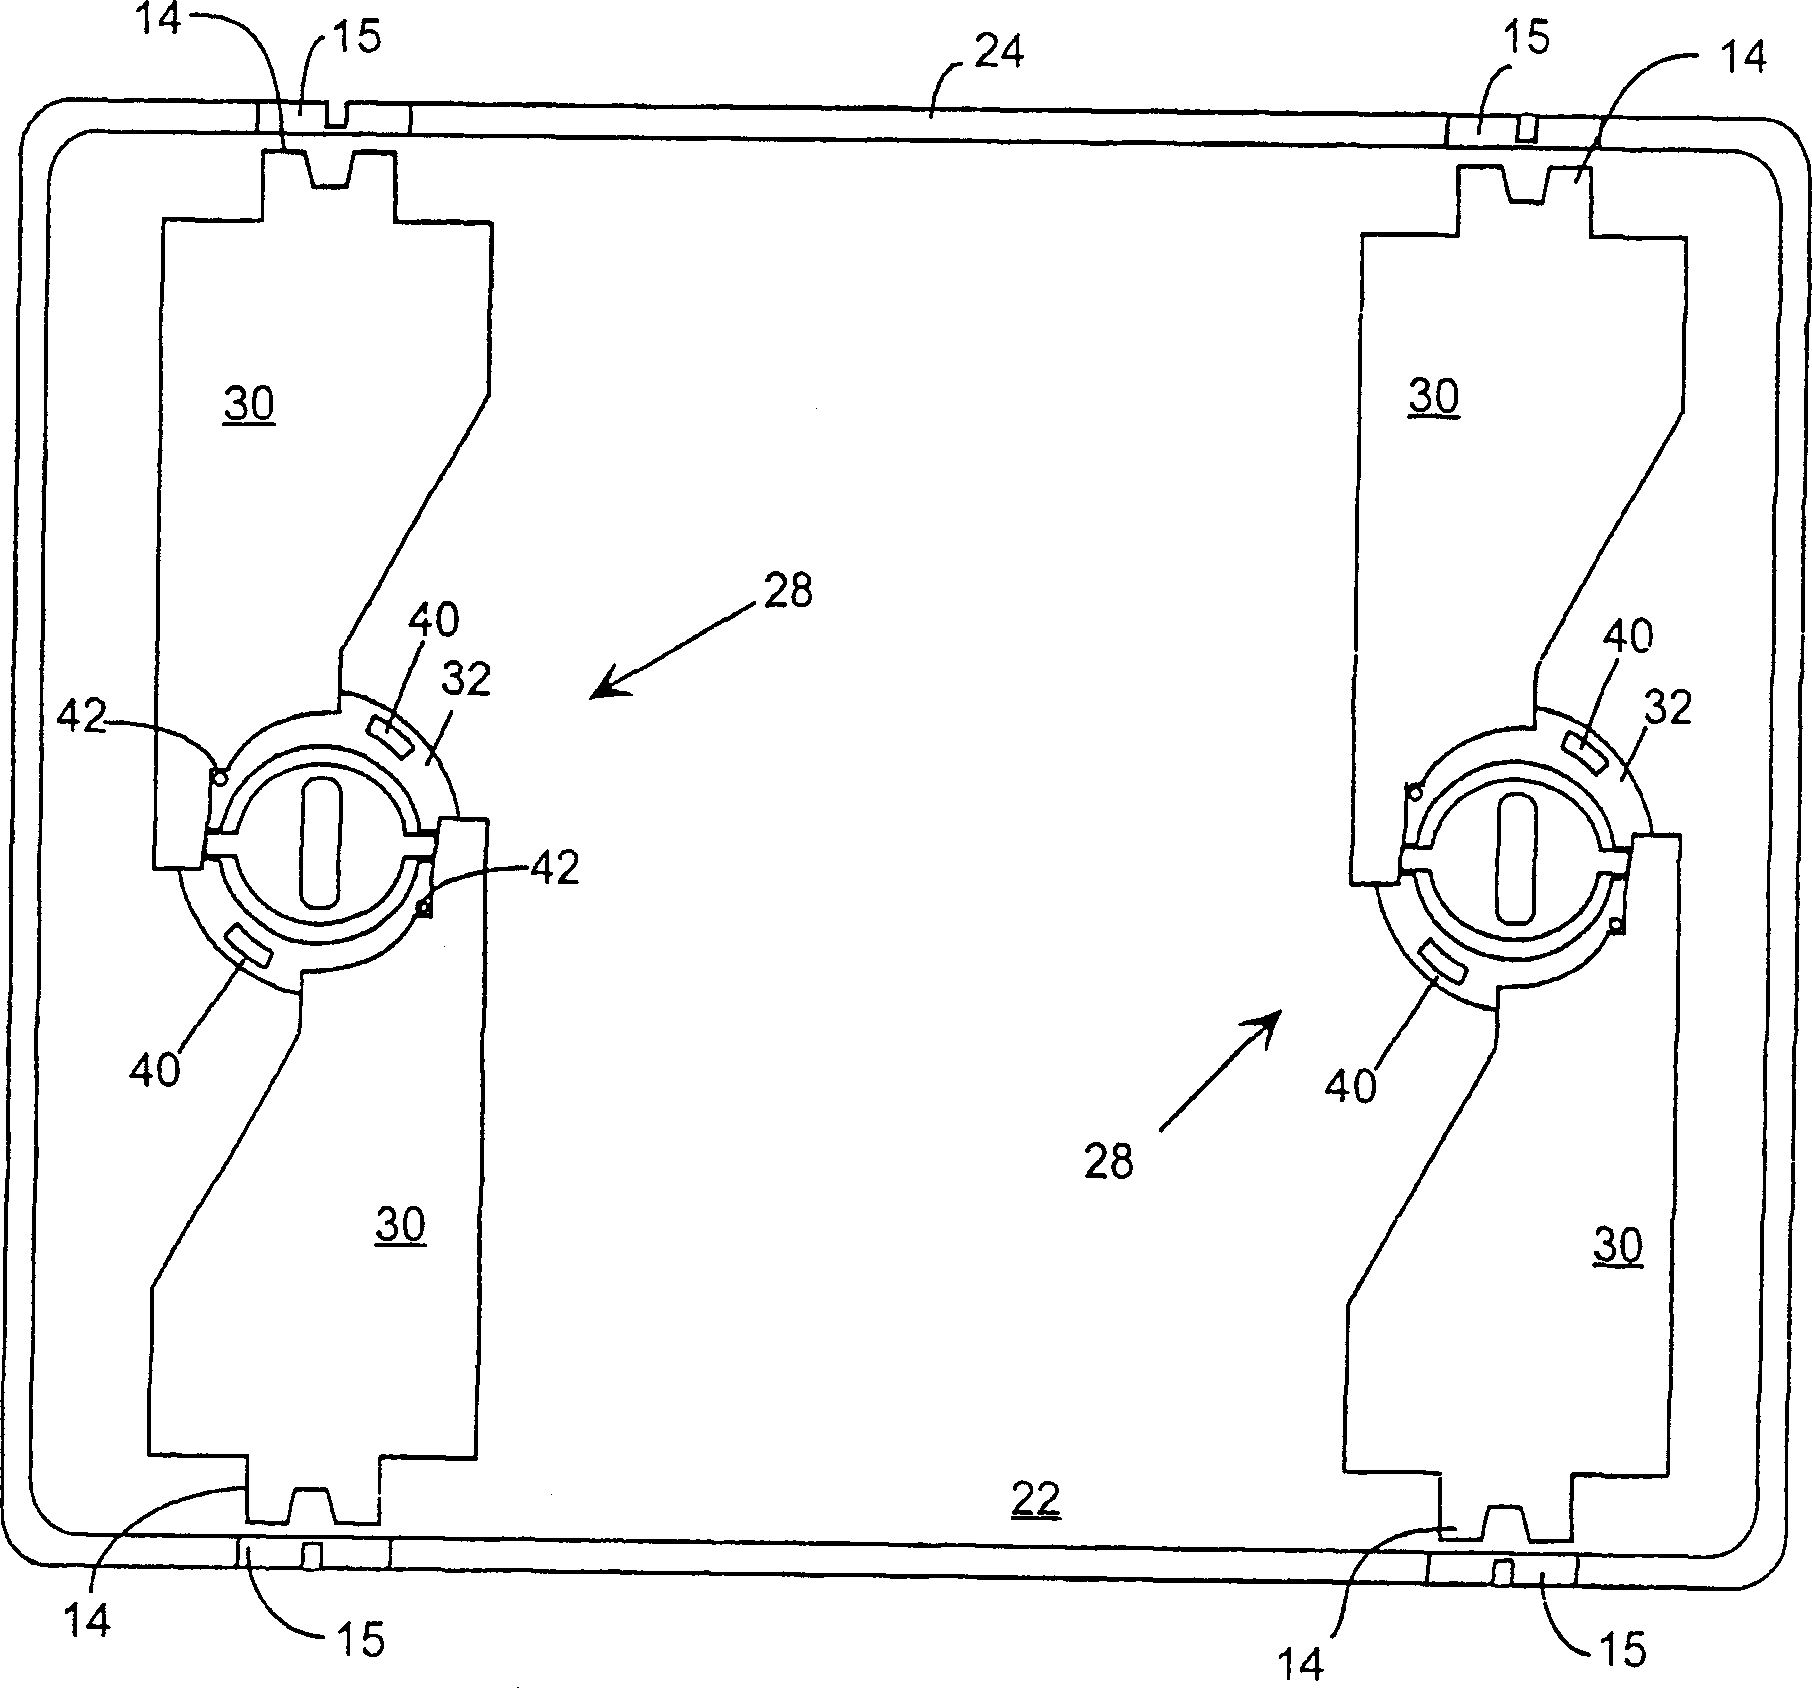 Laterally floating latch hub assembly